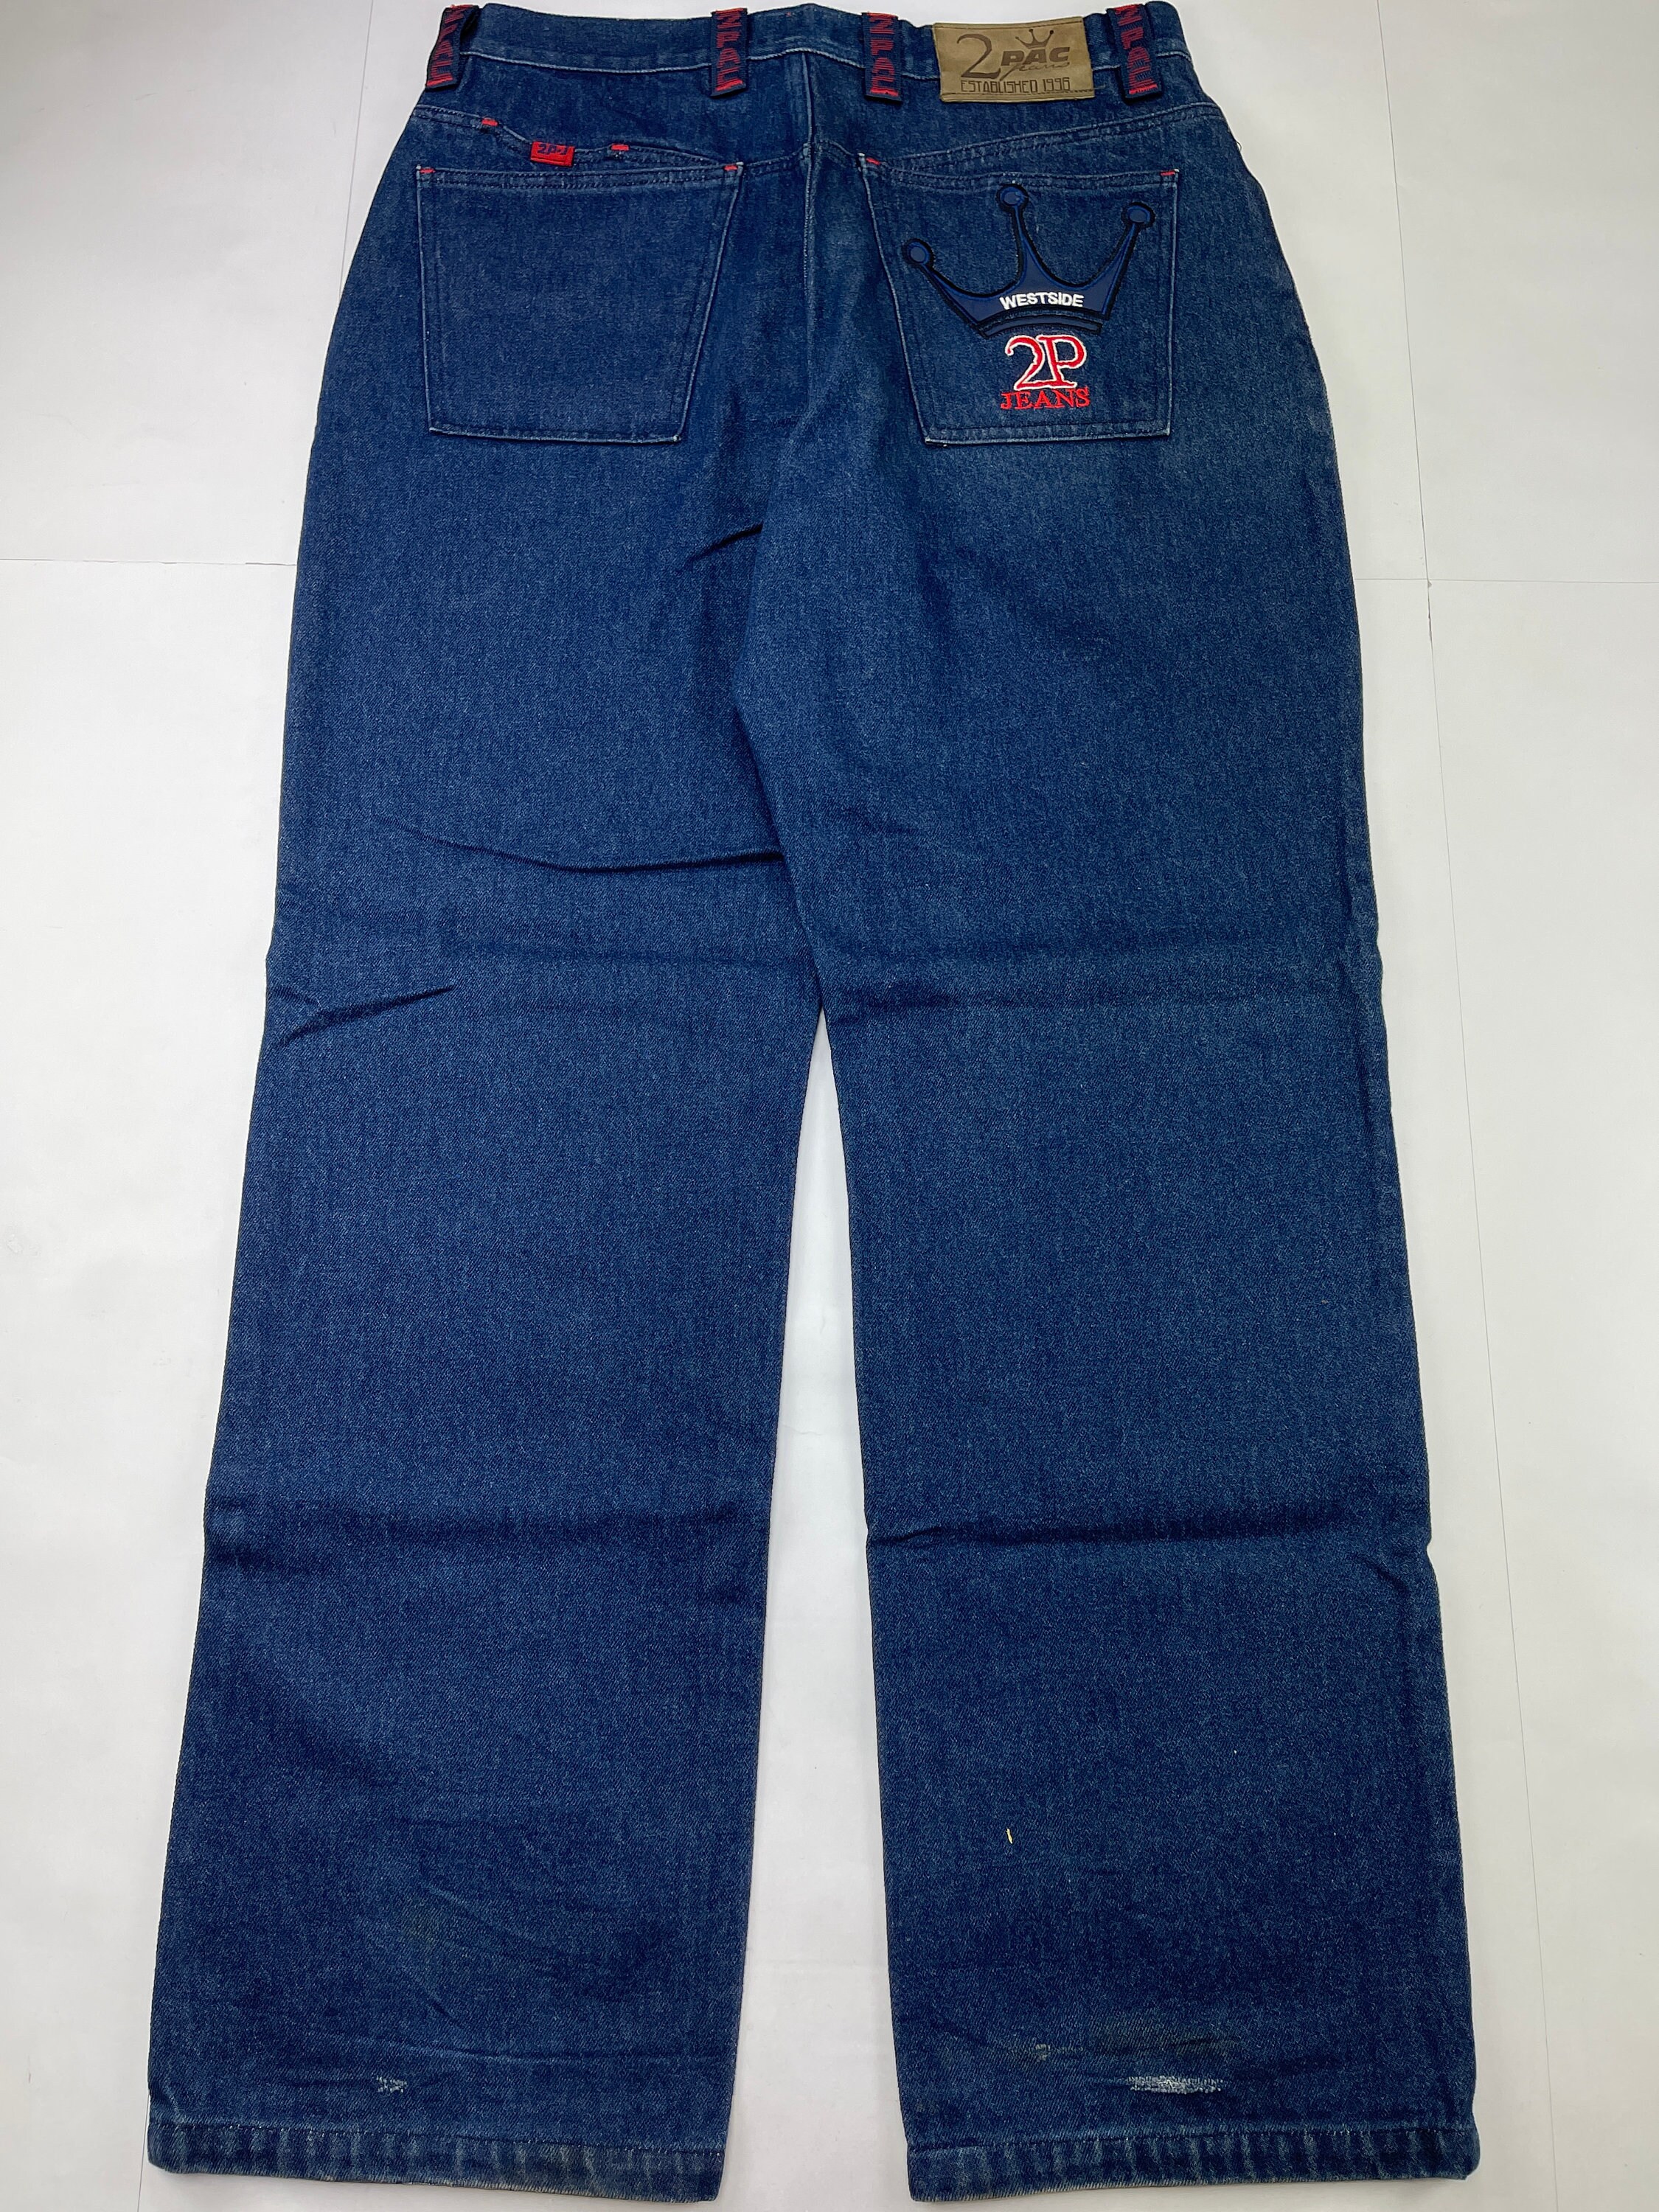 2pac Jeans Tupac Makaveli Blue Vintage Baggy Jeans 90s Hip - Etsy Finland